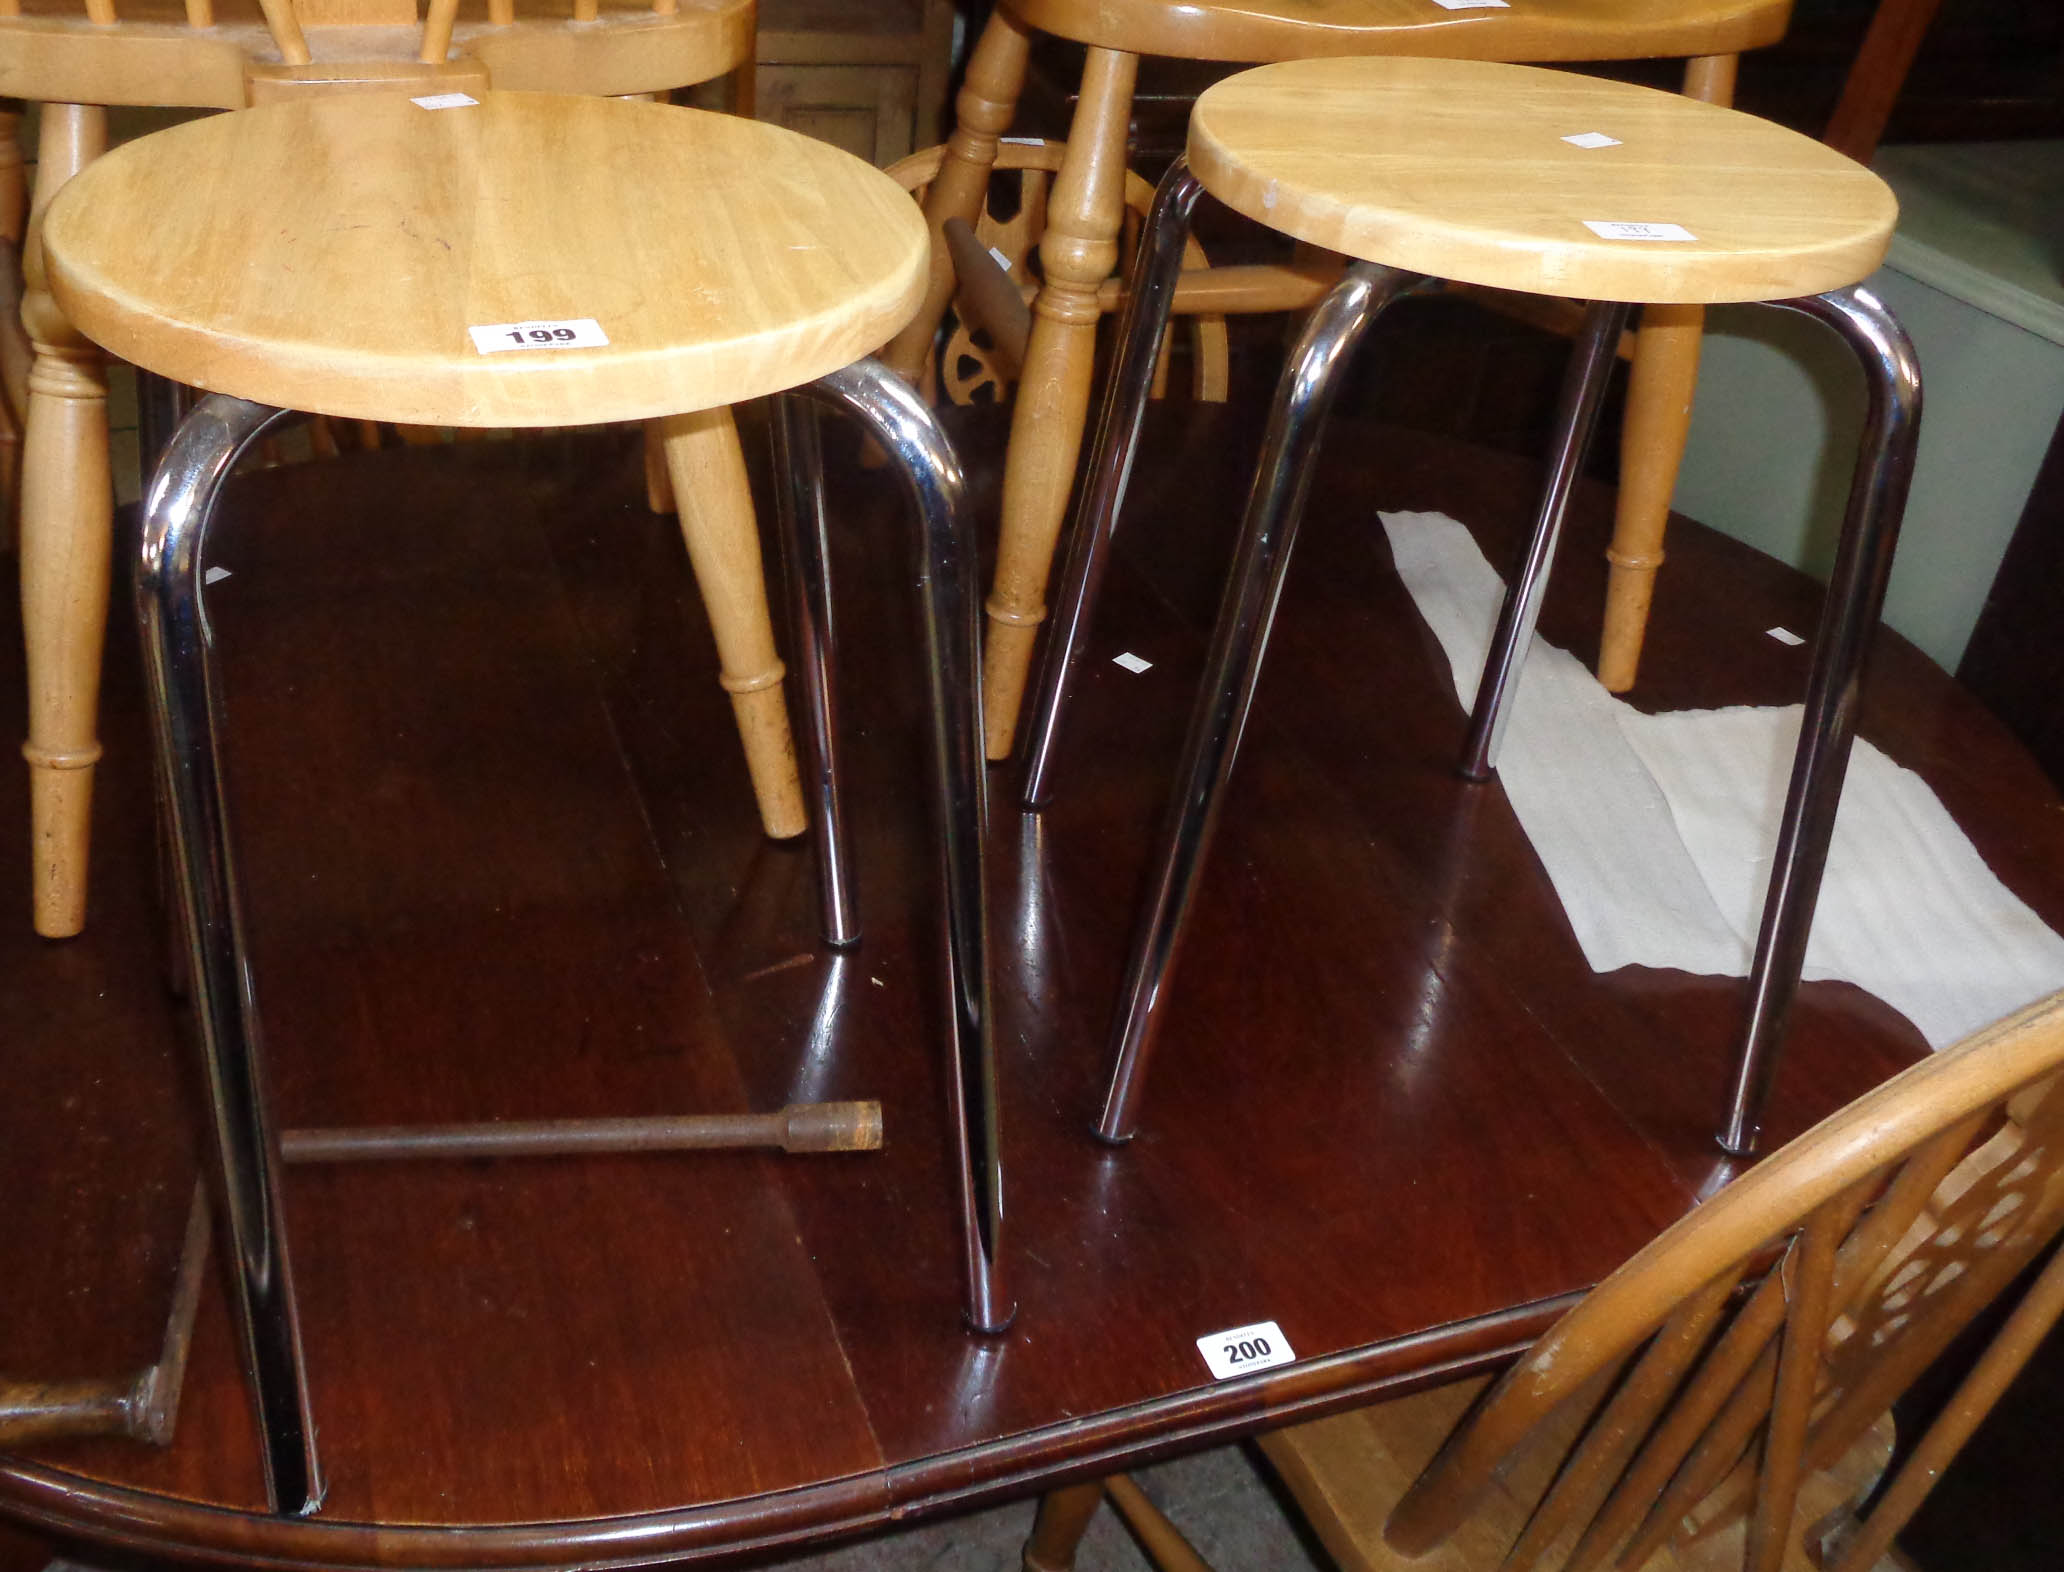 A pair of modern stools with polished blonde wood tops and chrome plated legs